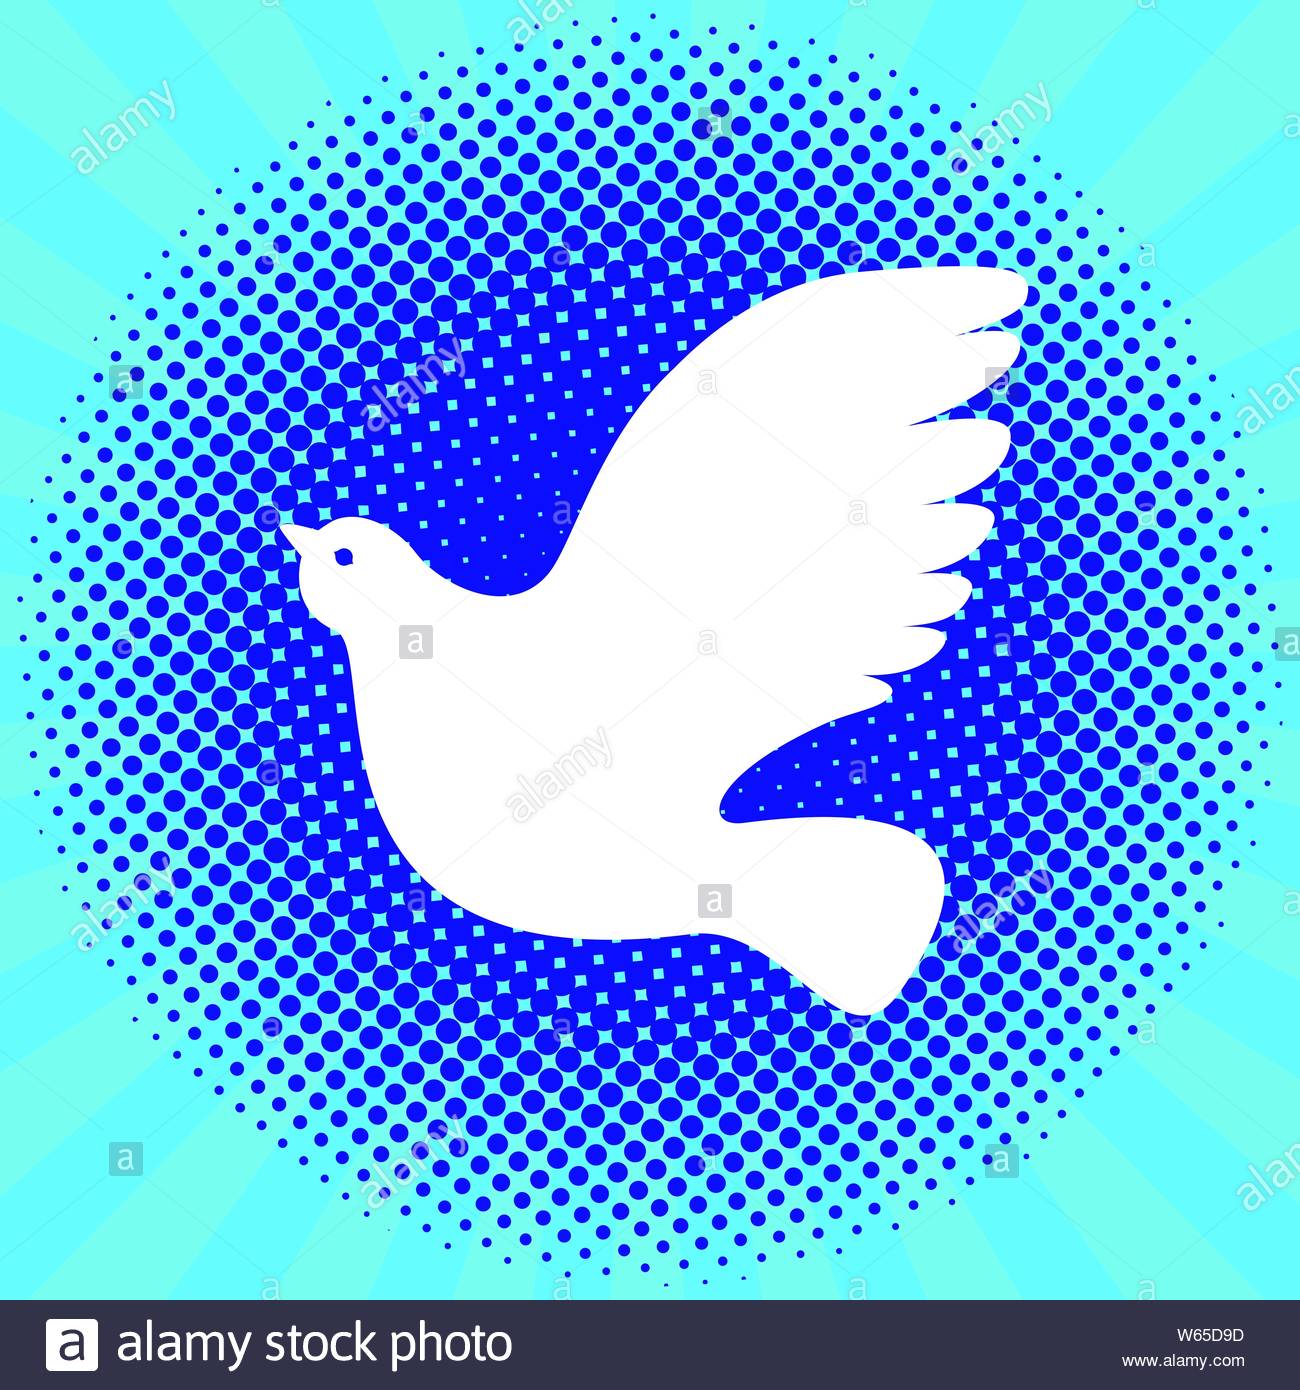 International Peace Day Concept Of A Social Holiday White Dove